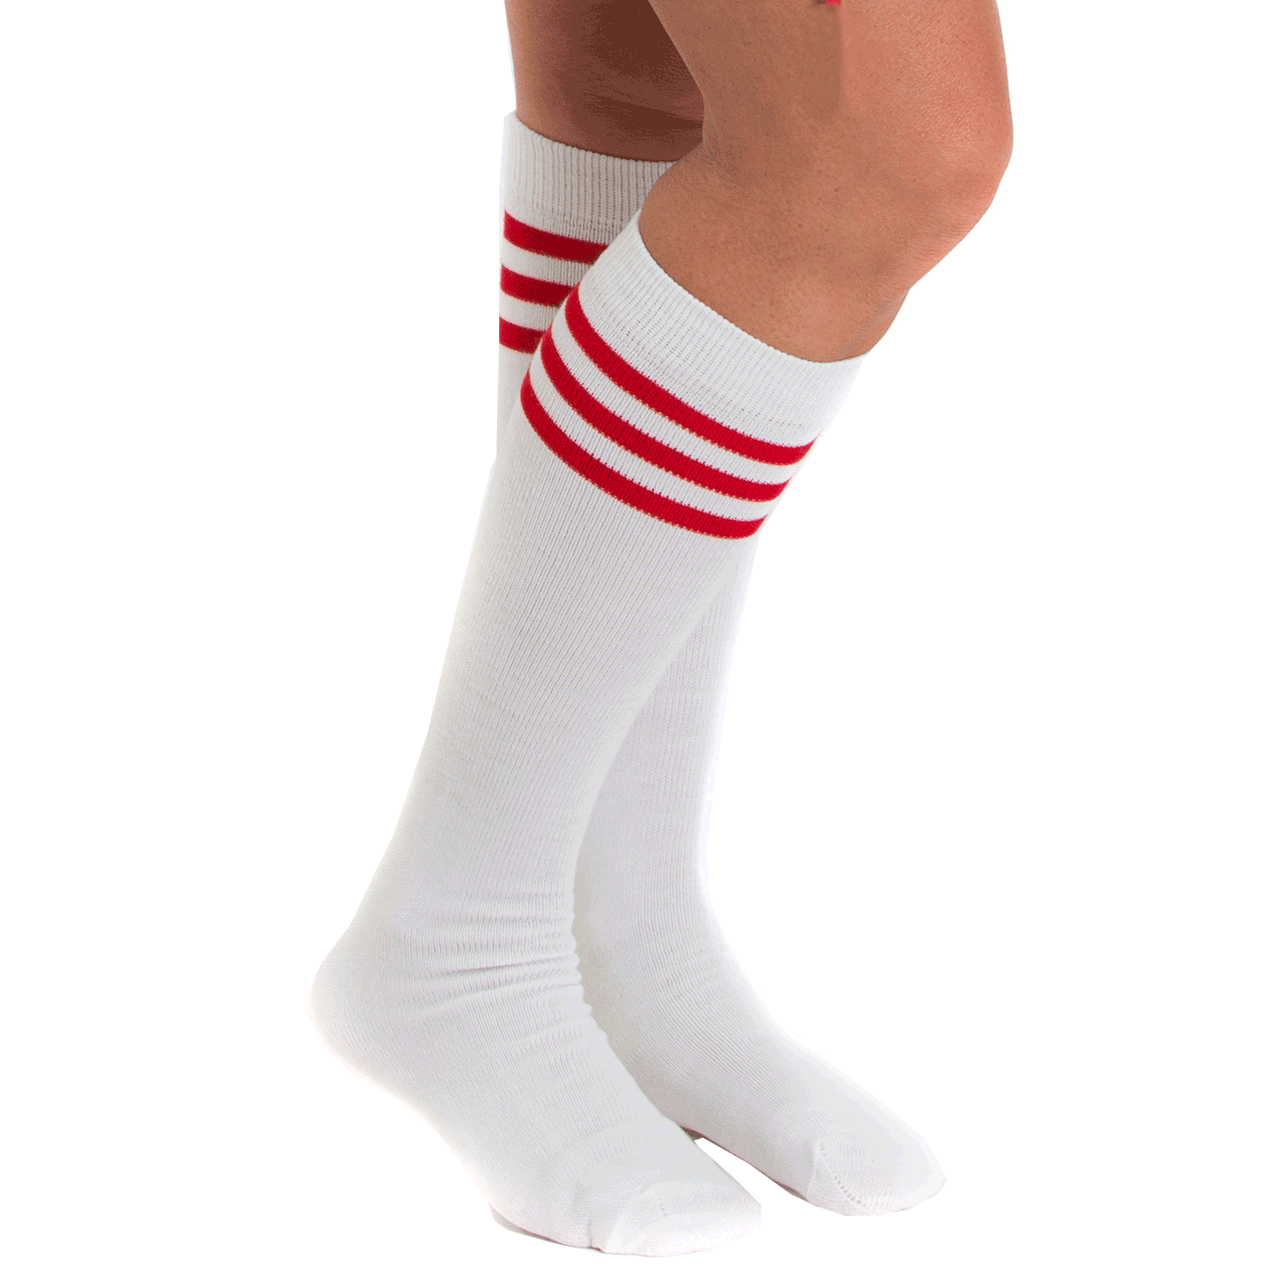 https://cdn11.bigcommerce.com/s-9k7zoiw/images/stencil/1280x1280/products/367/5794/white_tube_socks_red_371_1__00957__50005__52859__00238.1678543464.png?c=2